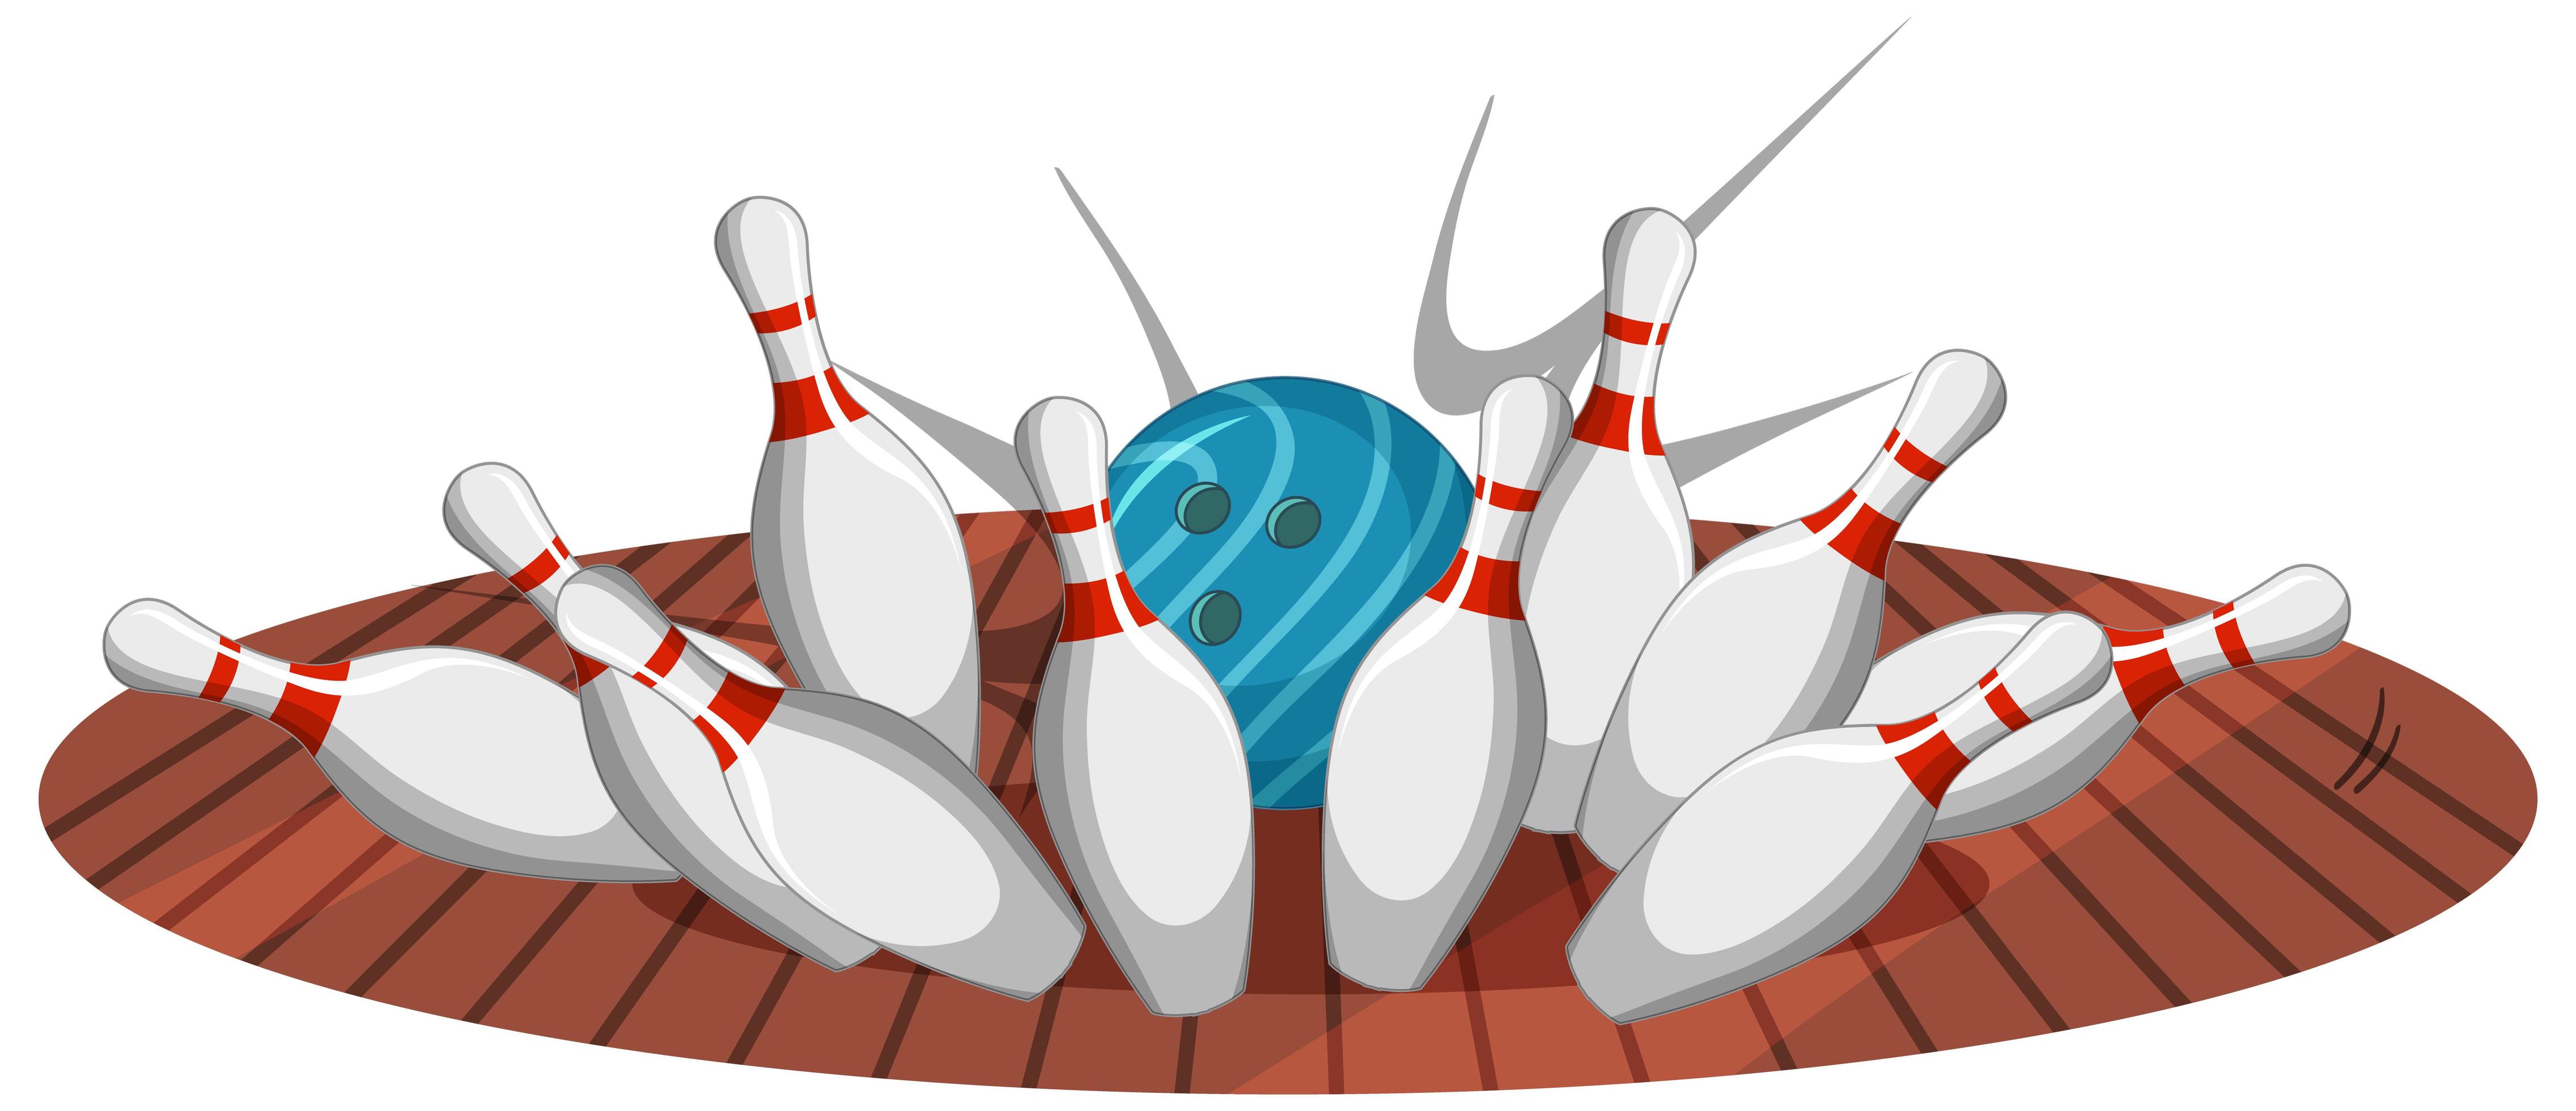 Bowling strike cartoon style isolated on white background Download Free Vectors Clipart